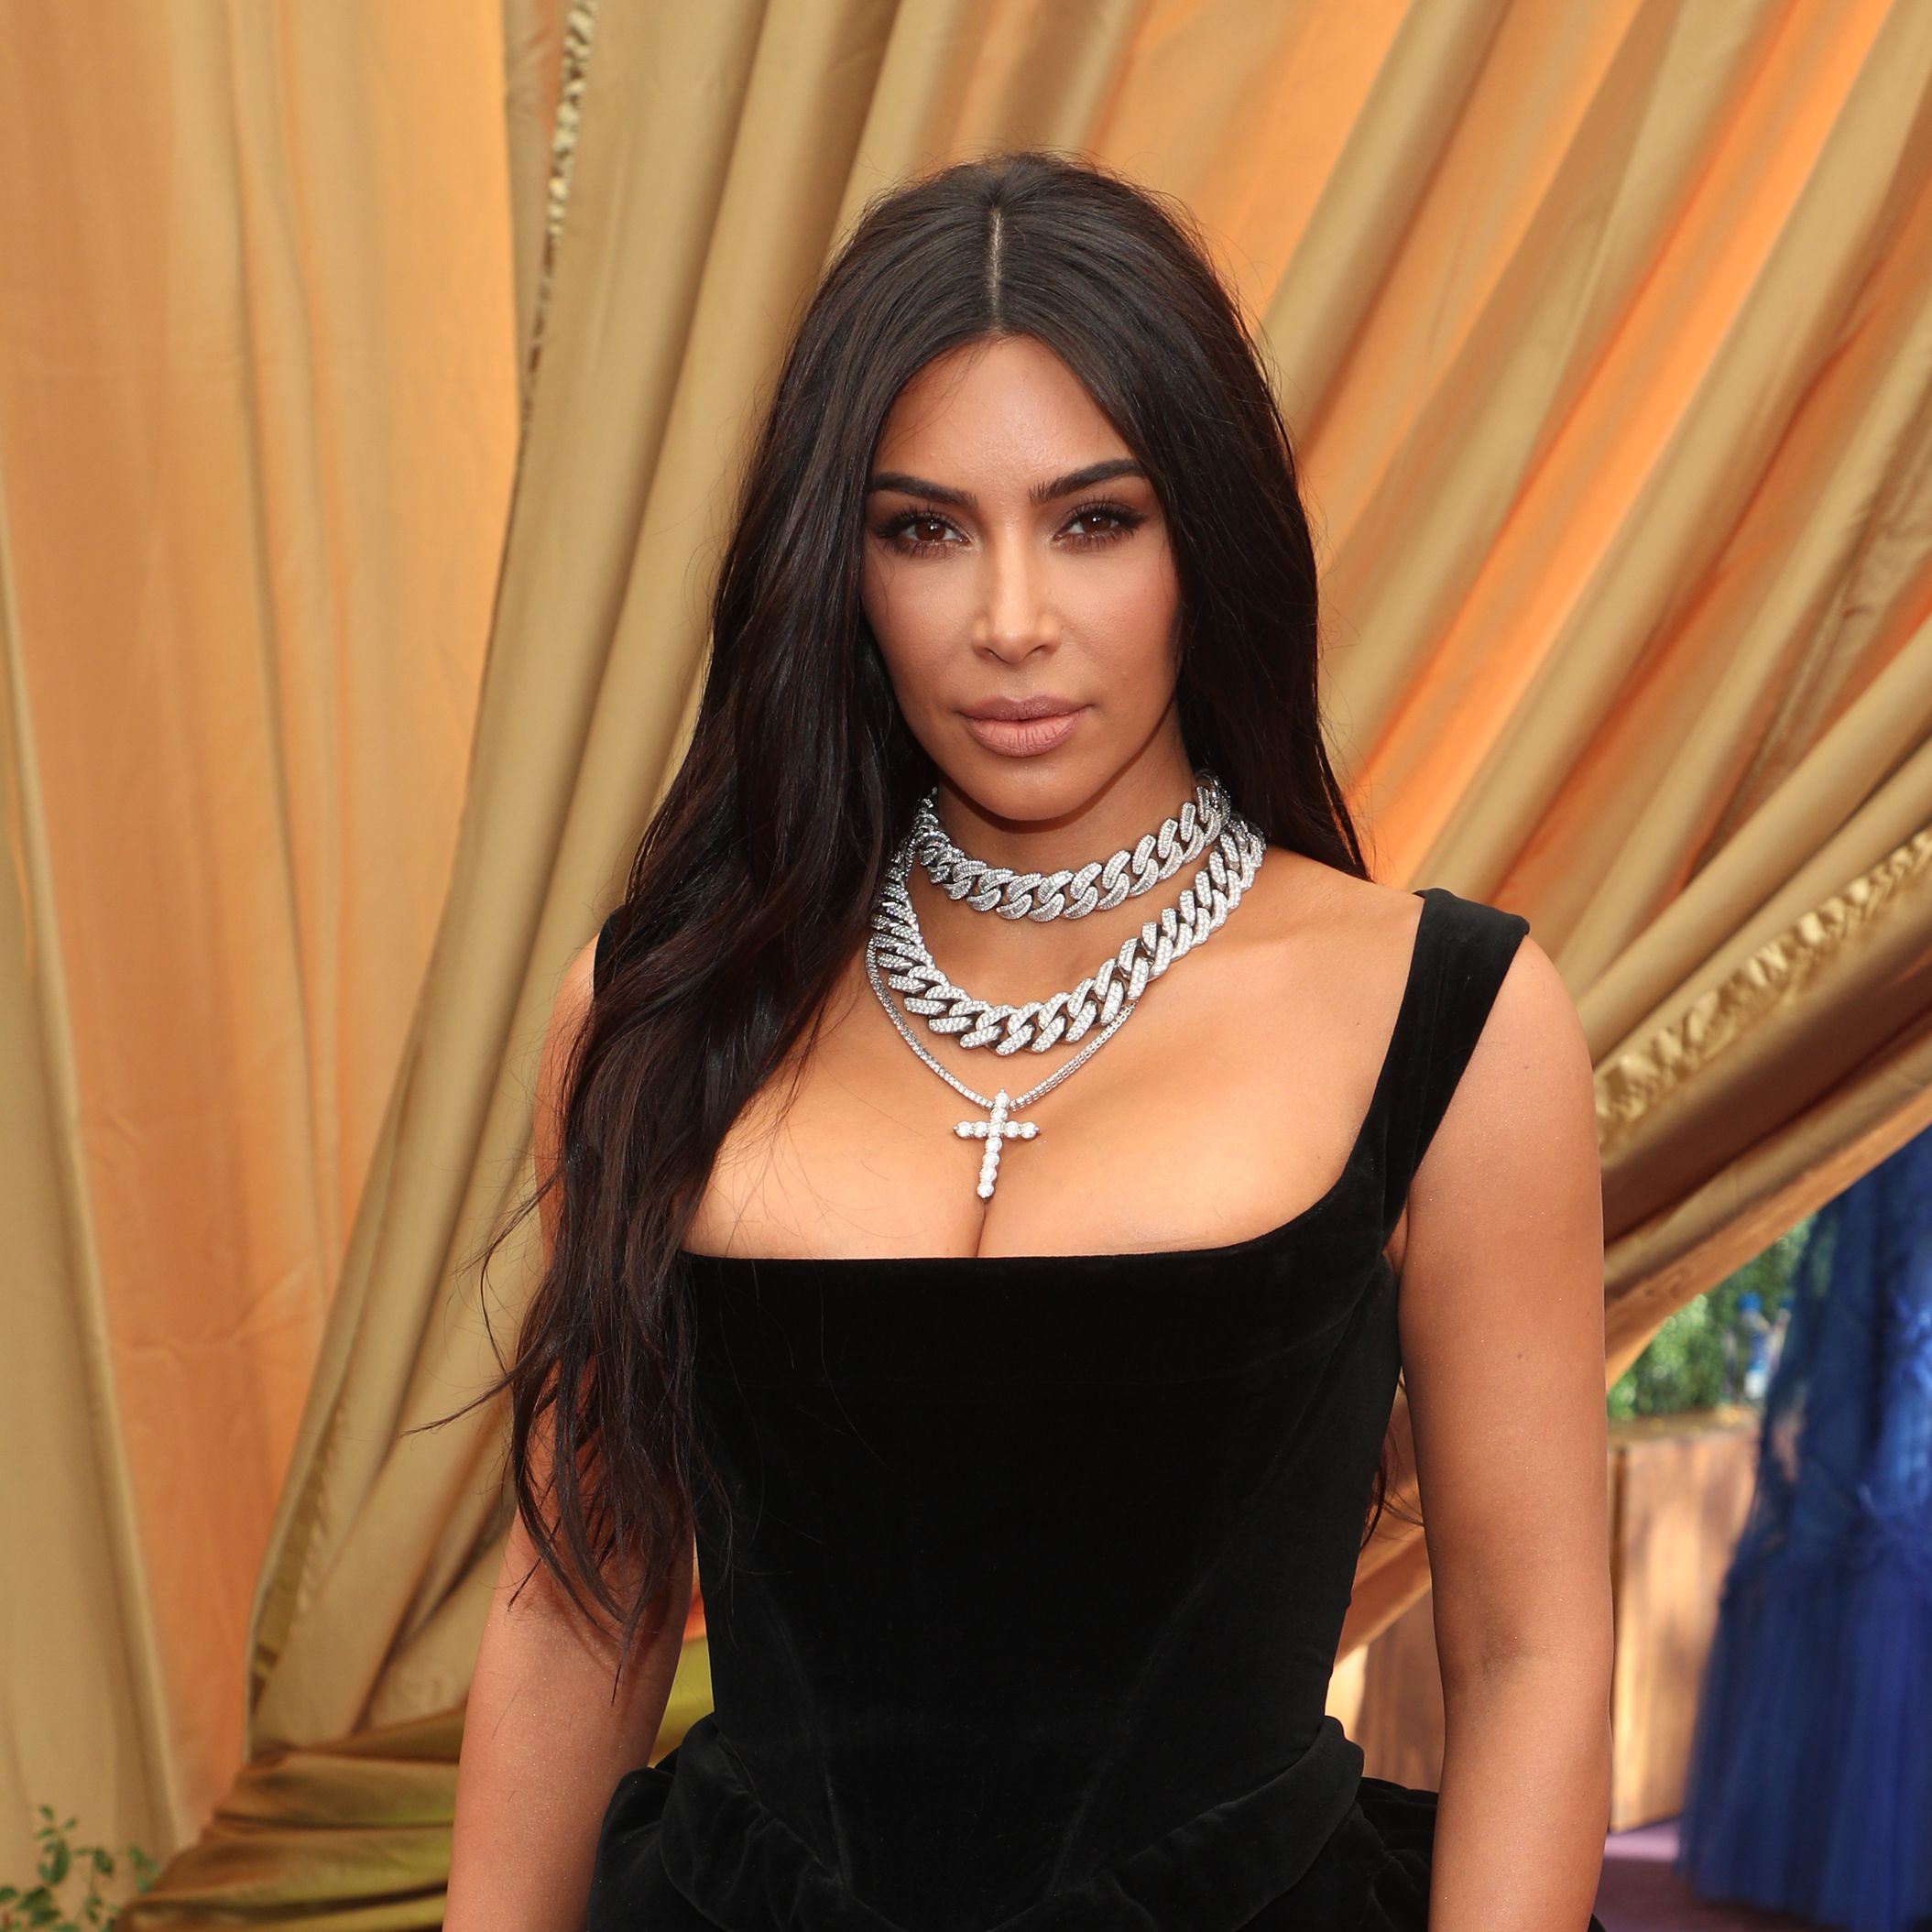 Kim Kardashian Responds to Claims of Second Sex Tape Following Kanye West's Interview